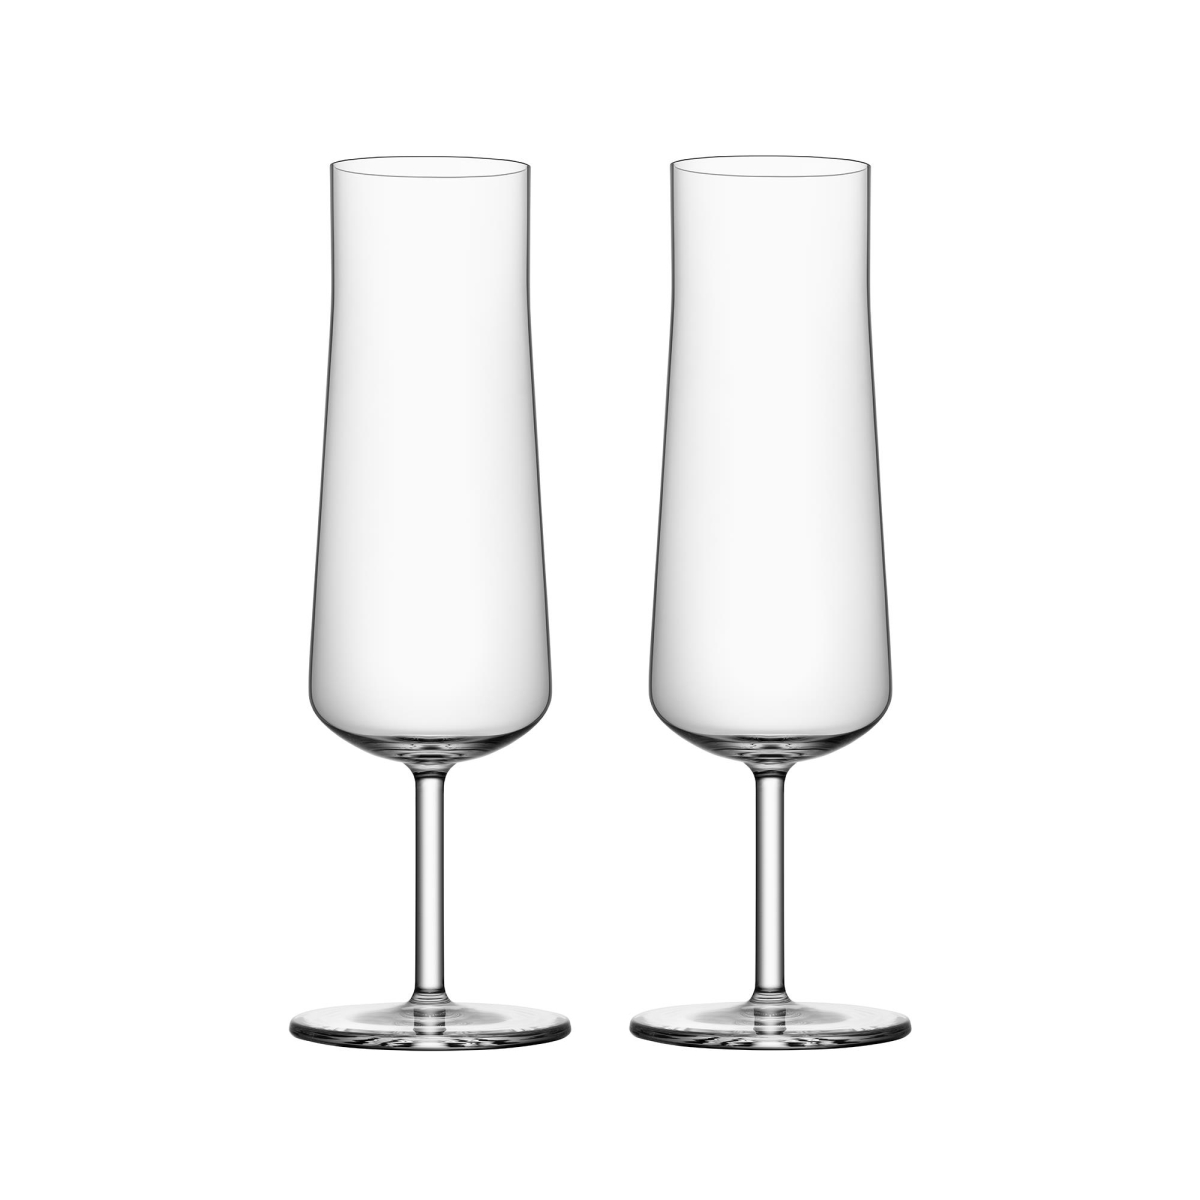 Picture of Orrefors 6402701 7.4 oz Informal Champagne Glass - Set of 2